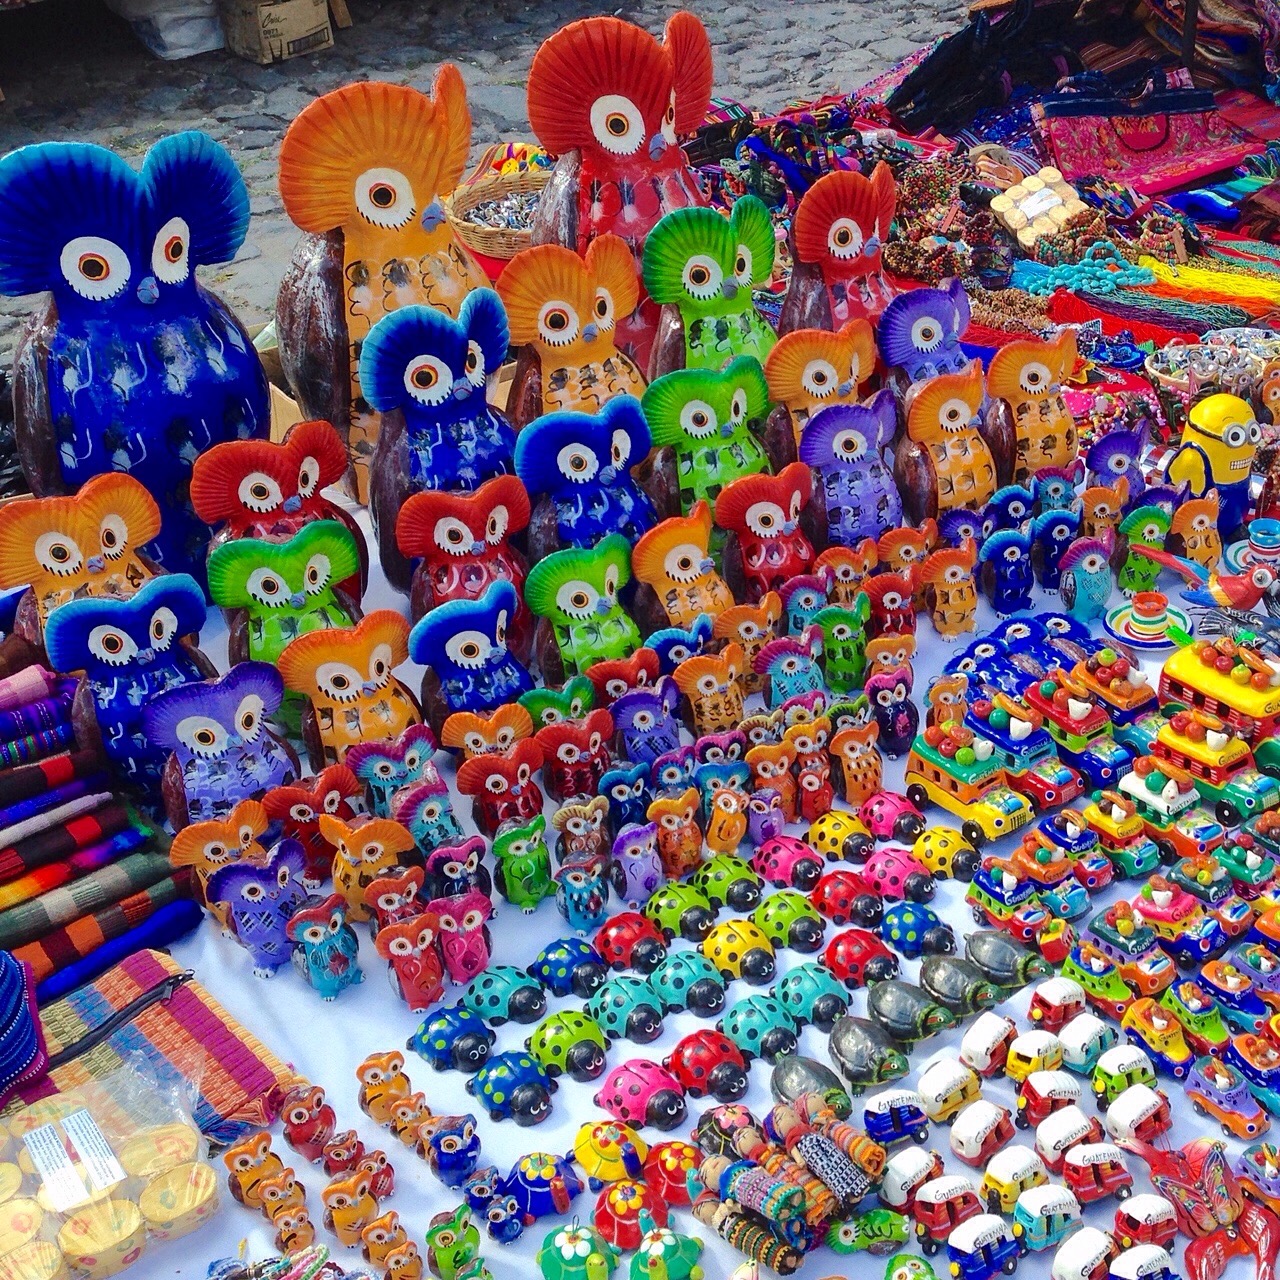 Hand made crafts at the market in Antigua Guatemala.